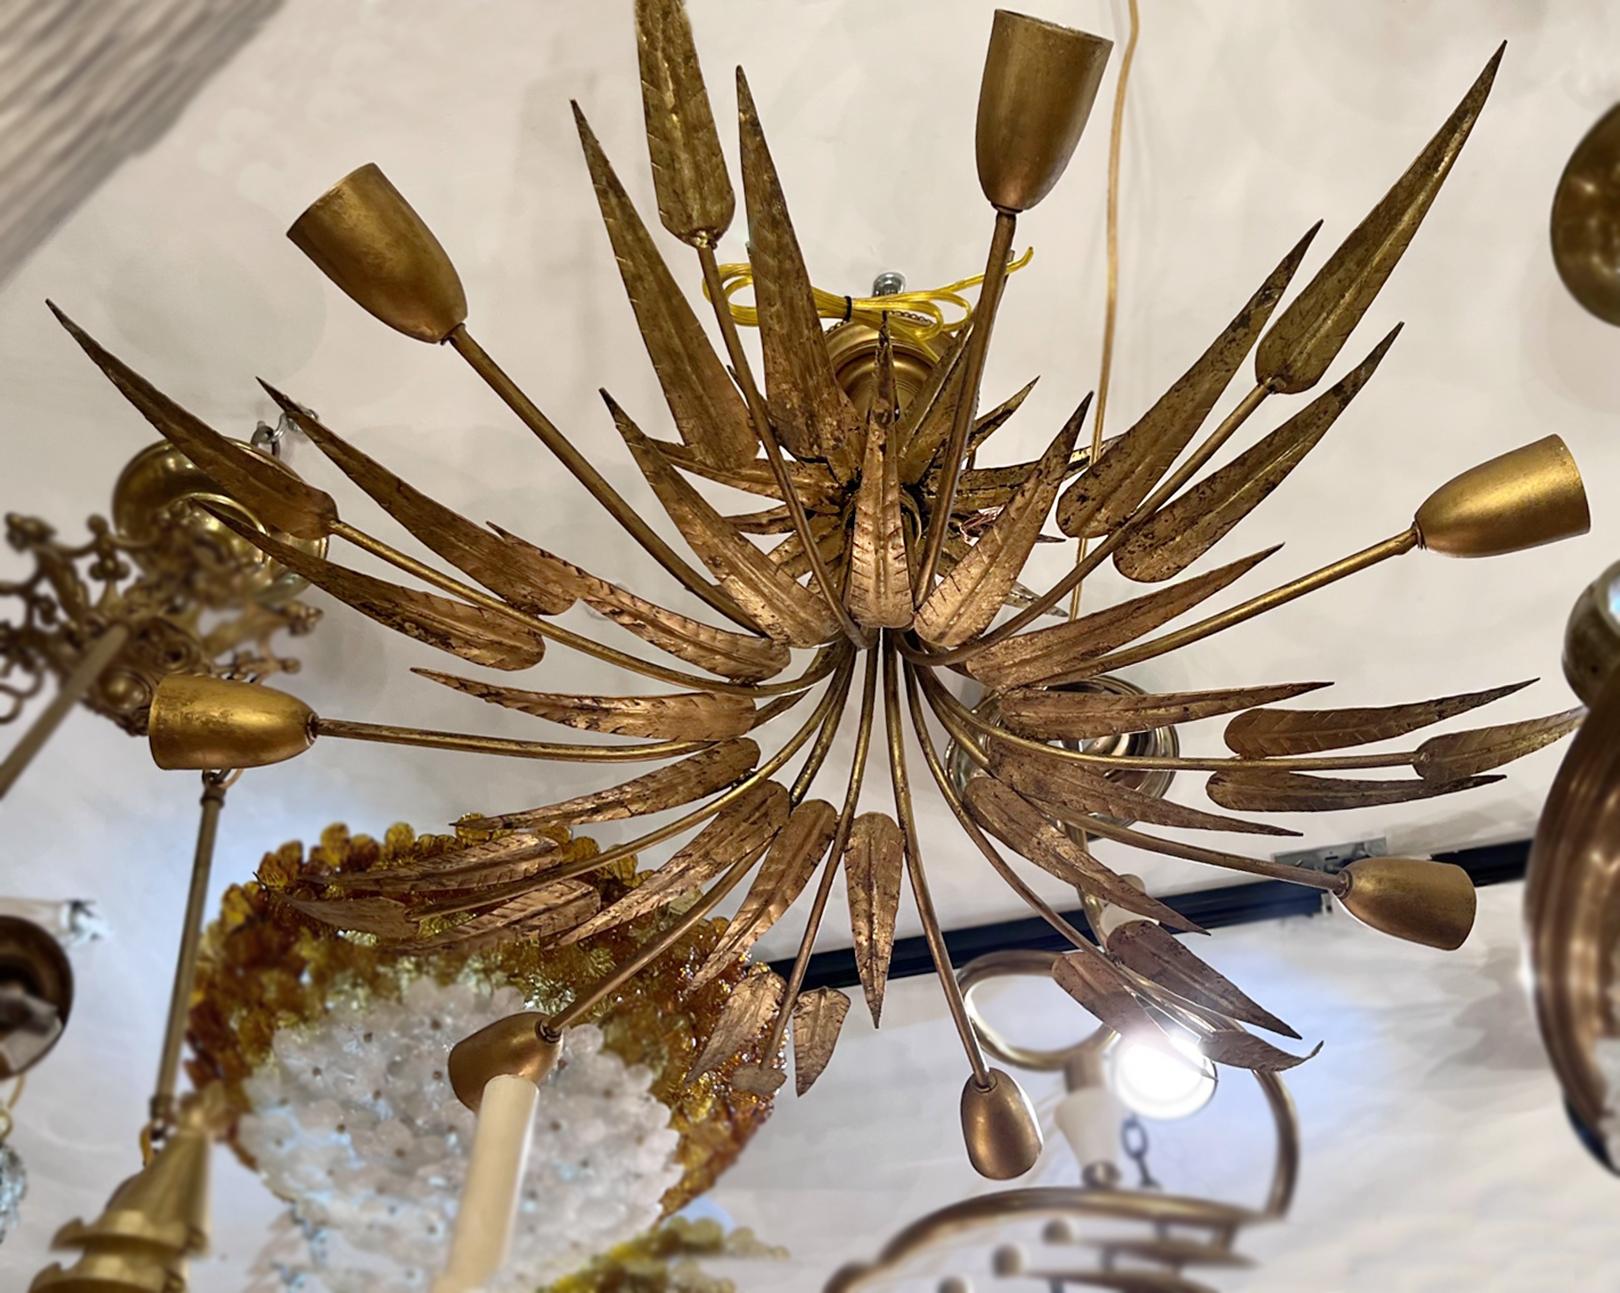 A circa 1960's Italian gilt metal light fixture with foliage motif with 7 candelabra lights.

Measurements:
Height of body: 15